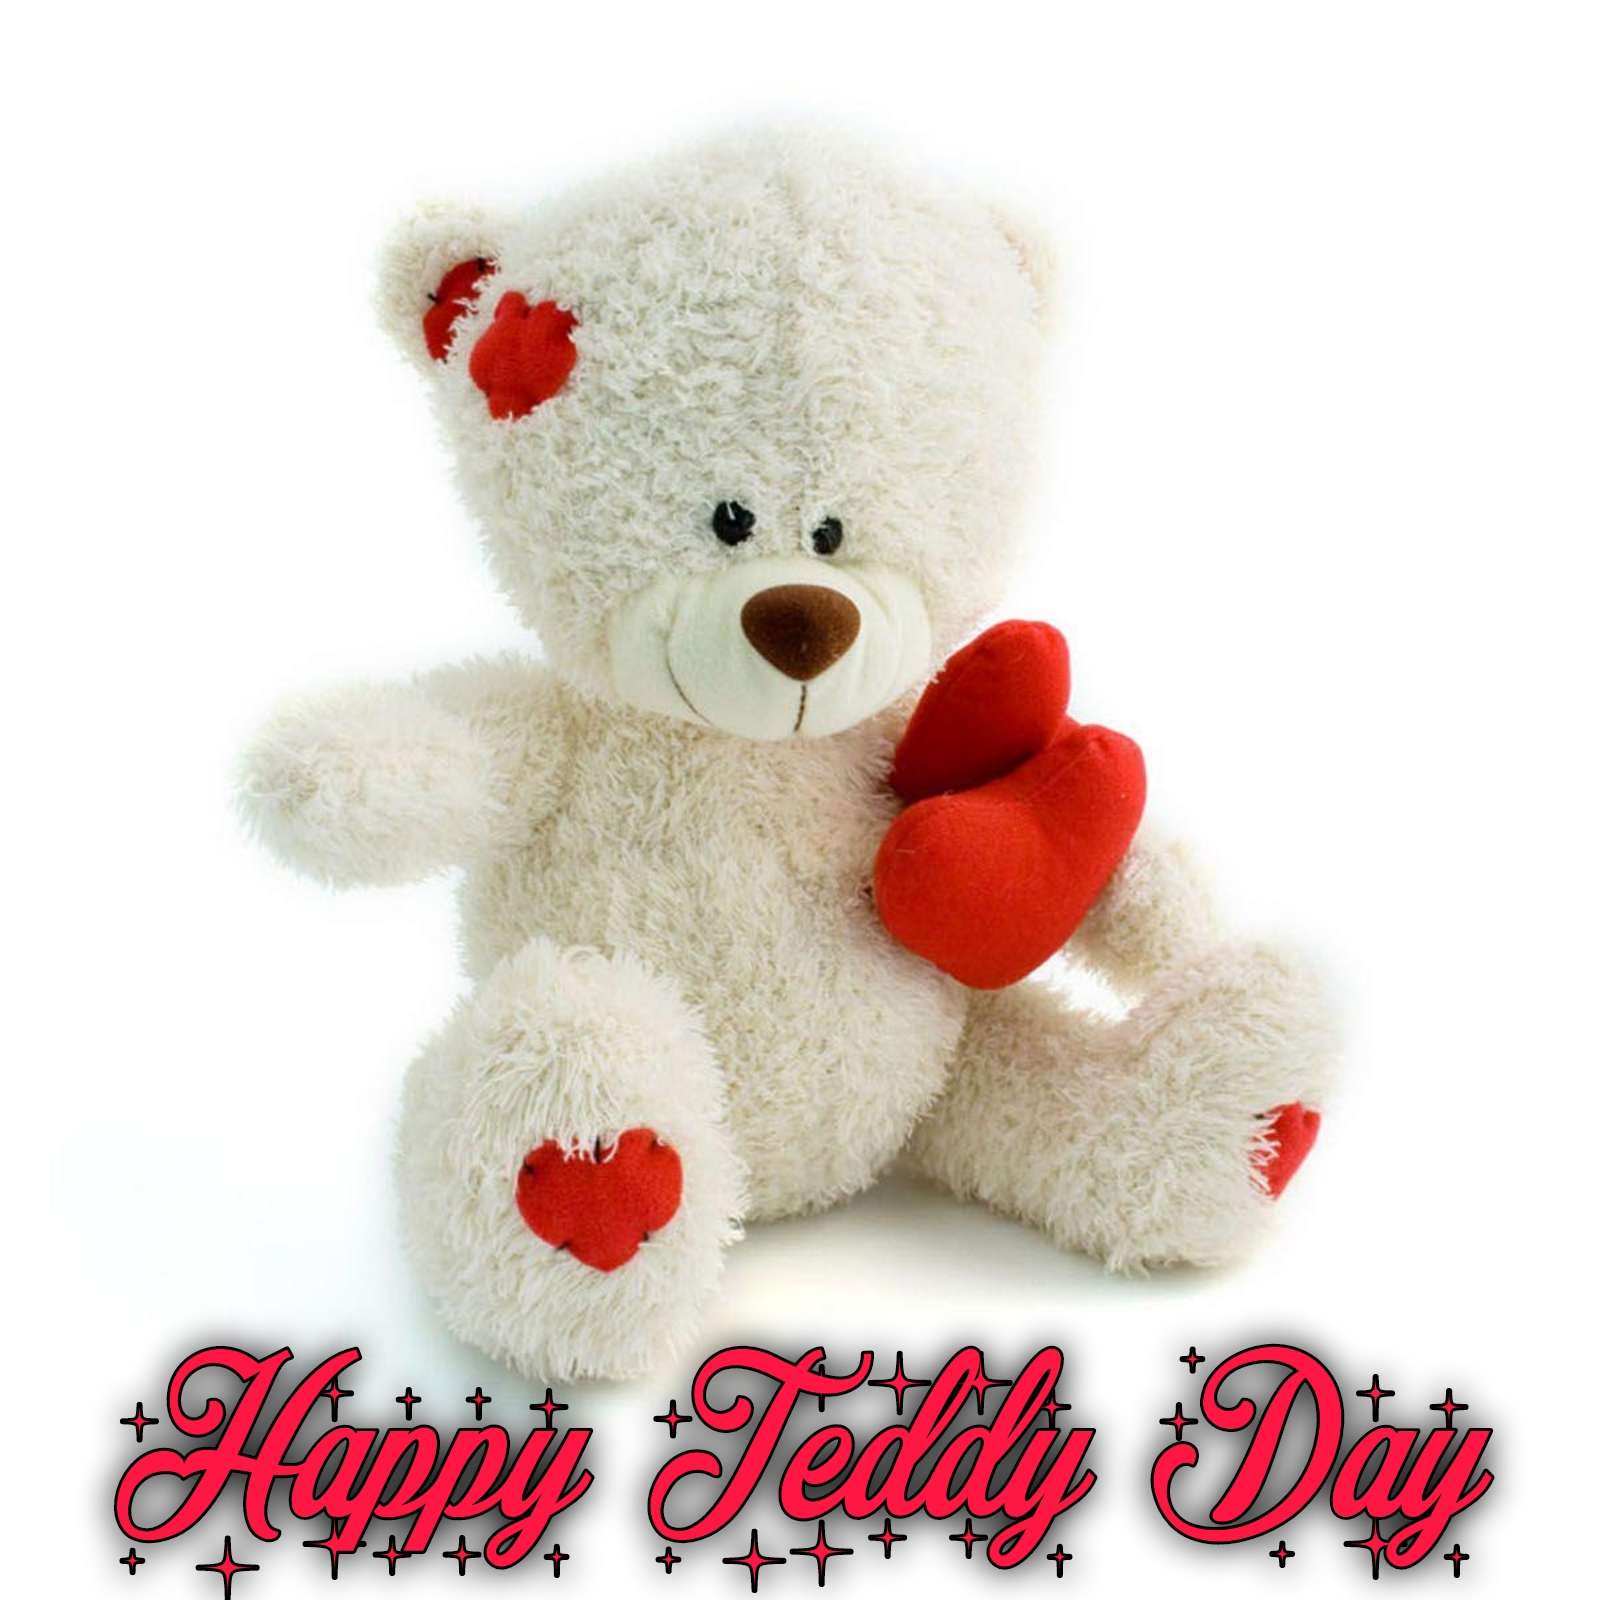 Romantic Teddy Day Images Download